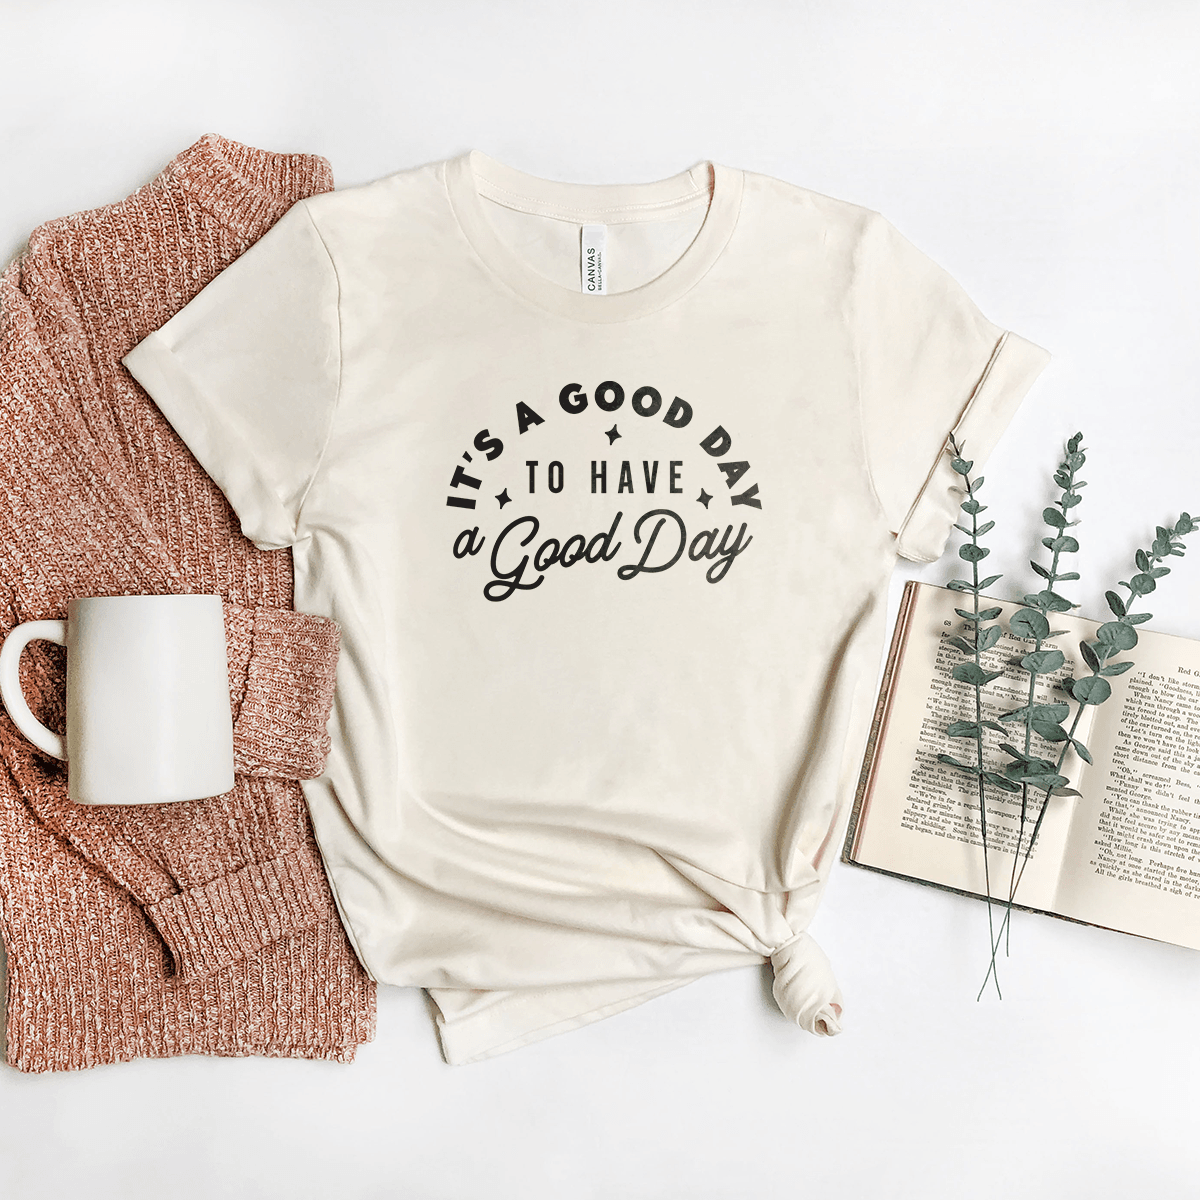 It's a Good Day to Have a Good Day - Bella+Canvas Tee